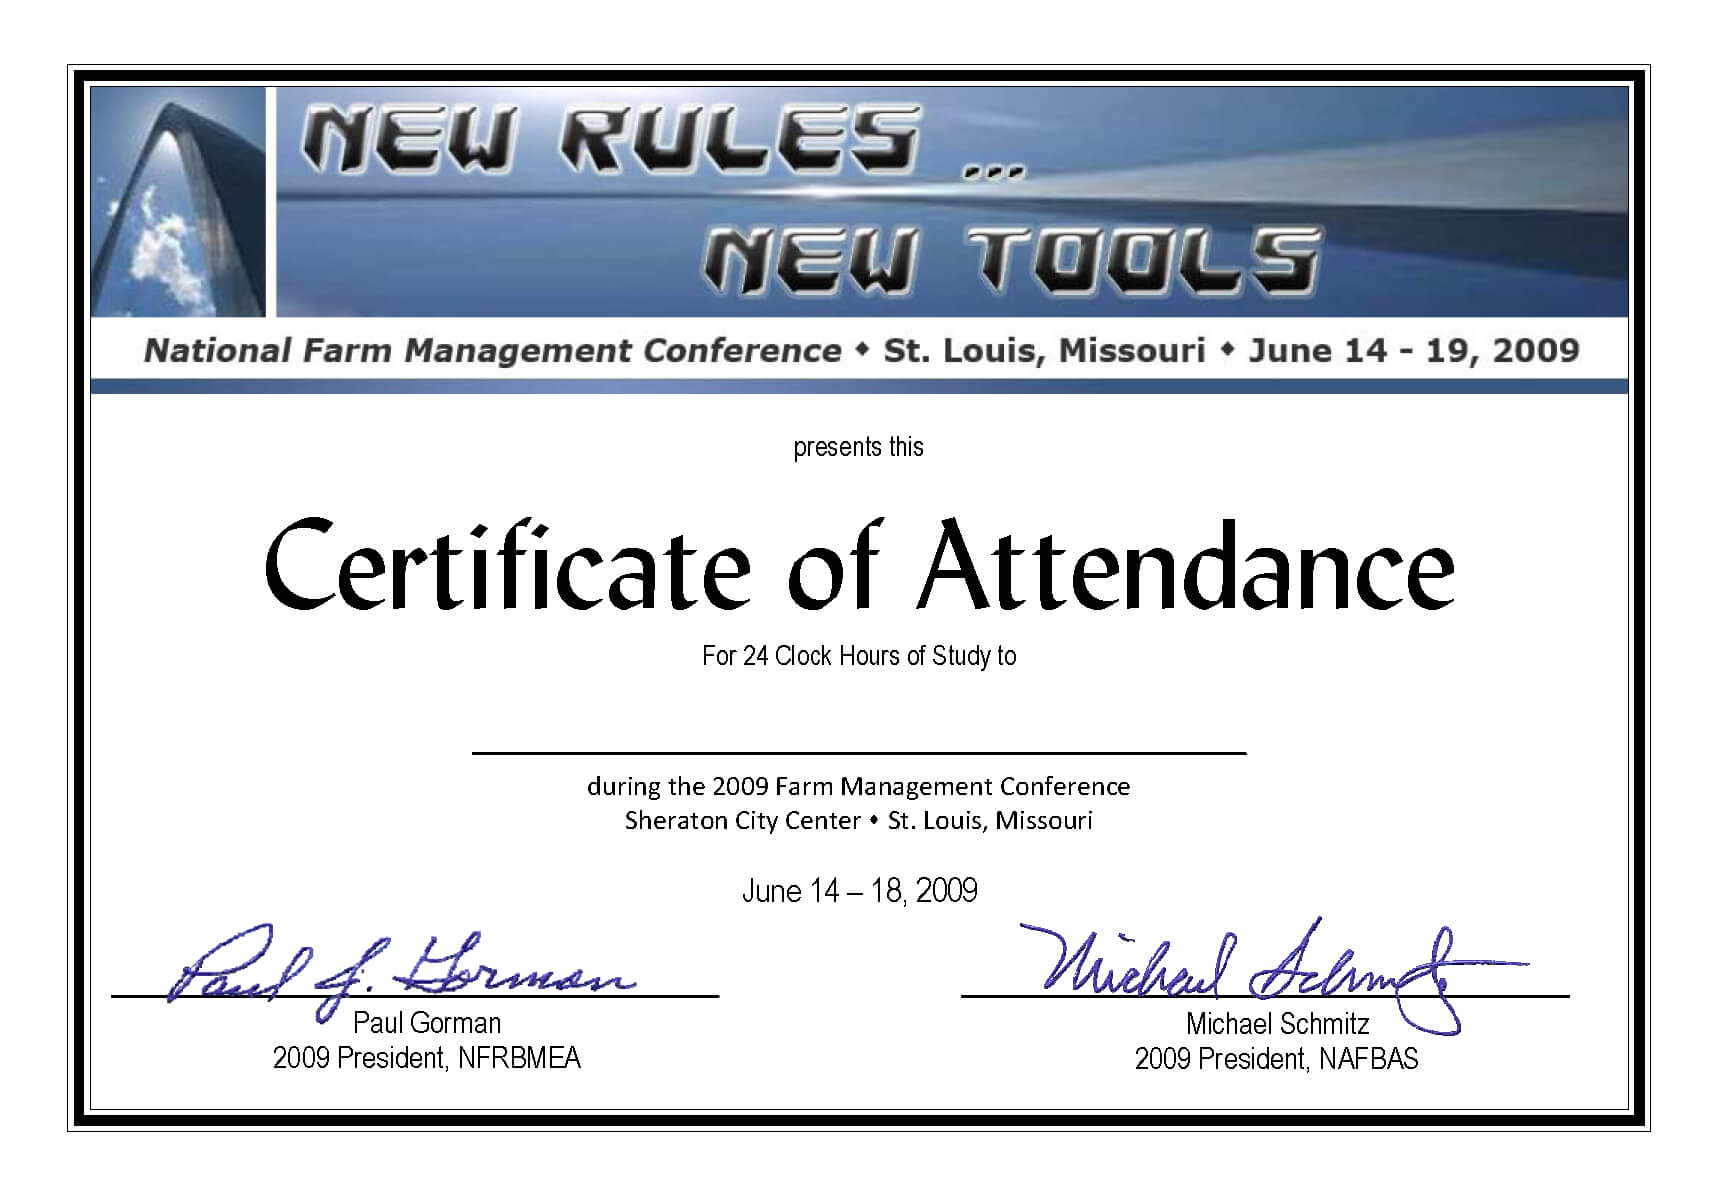 Conference Certificate Of Attendance Template - Great Intended For Certificate Of Attendance Conference Template